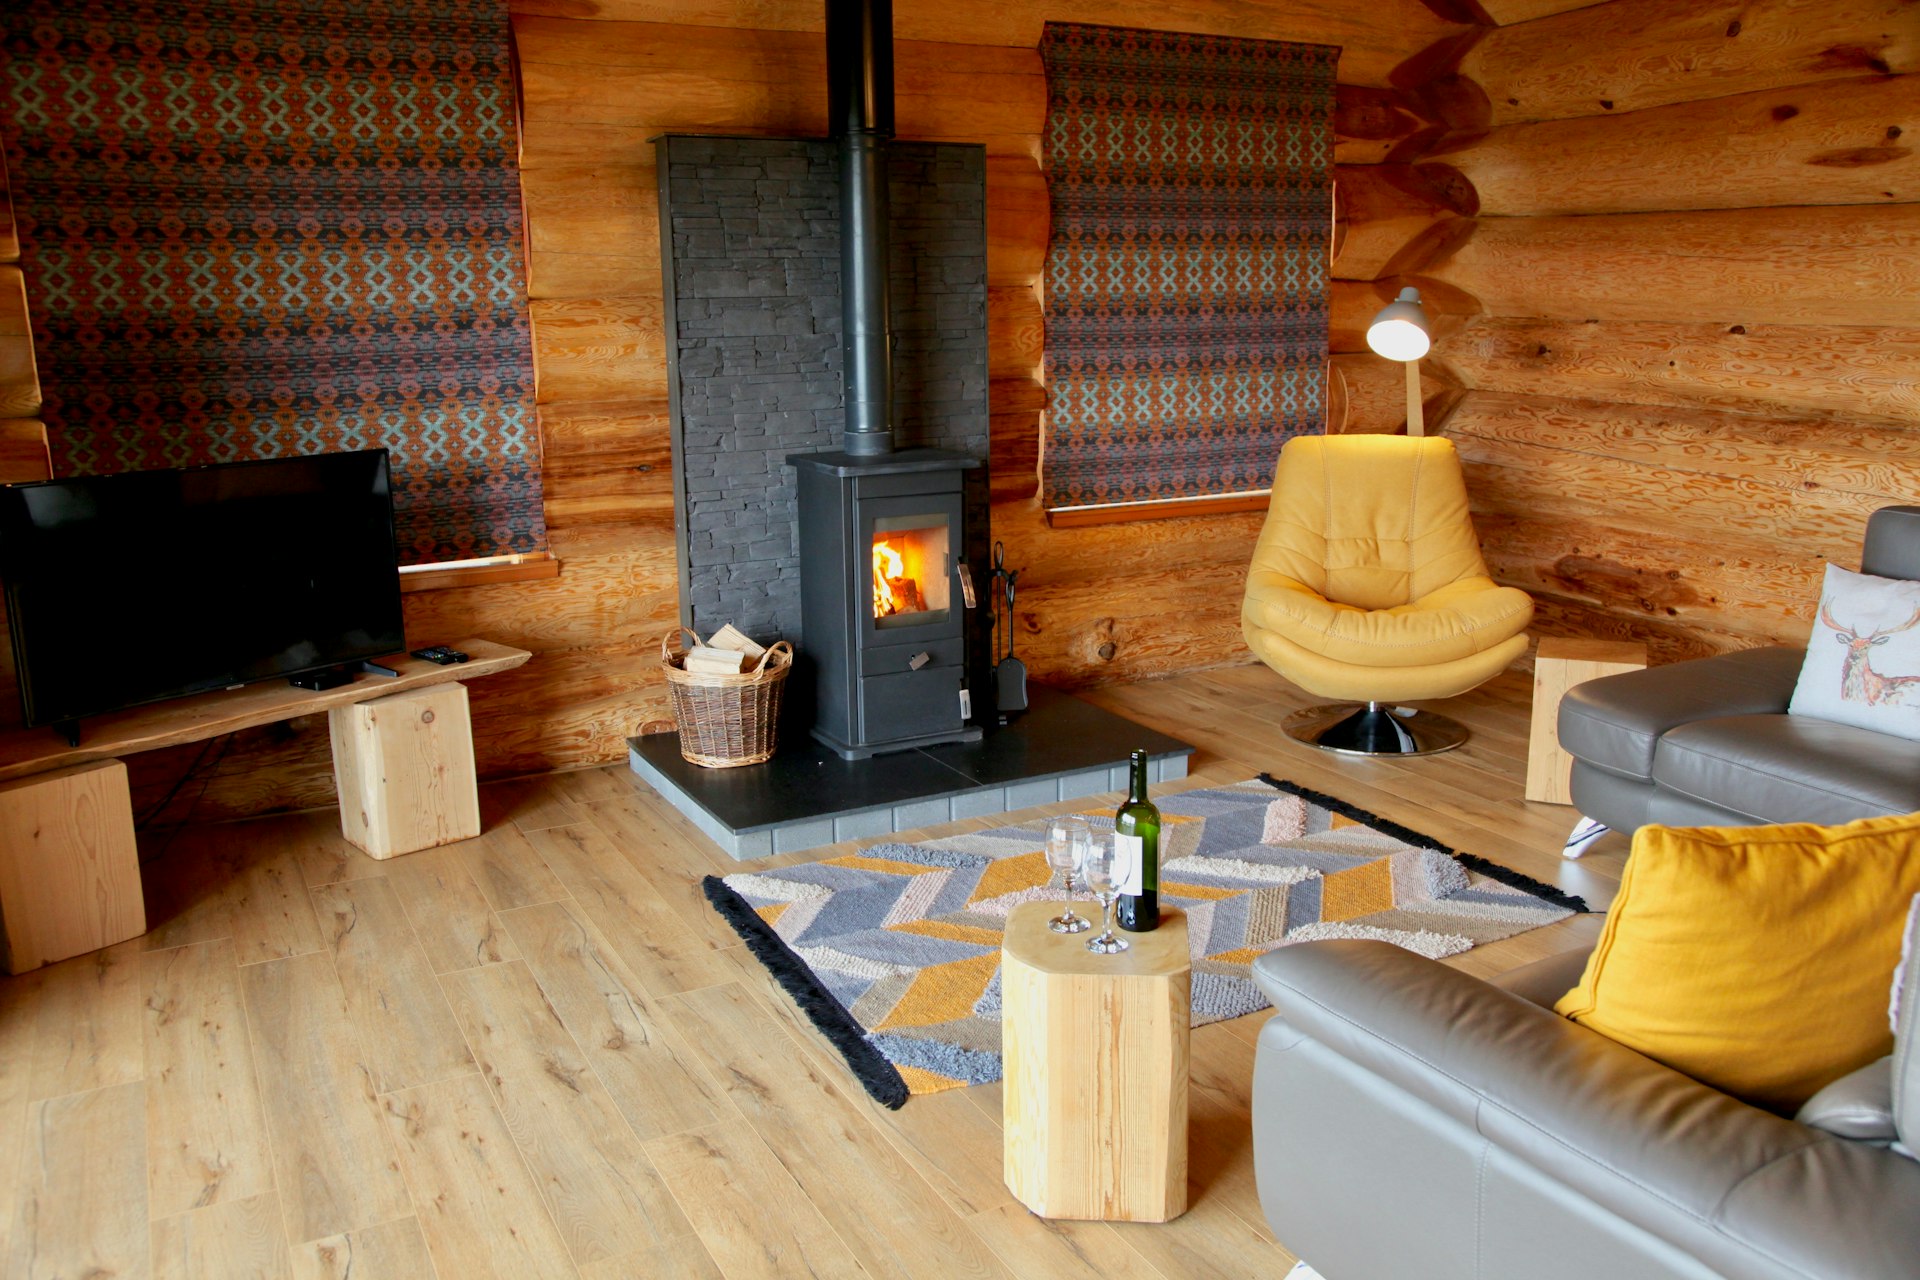 Interior shot of a luxury log cabin, with leather sofas and a wood burner